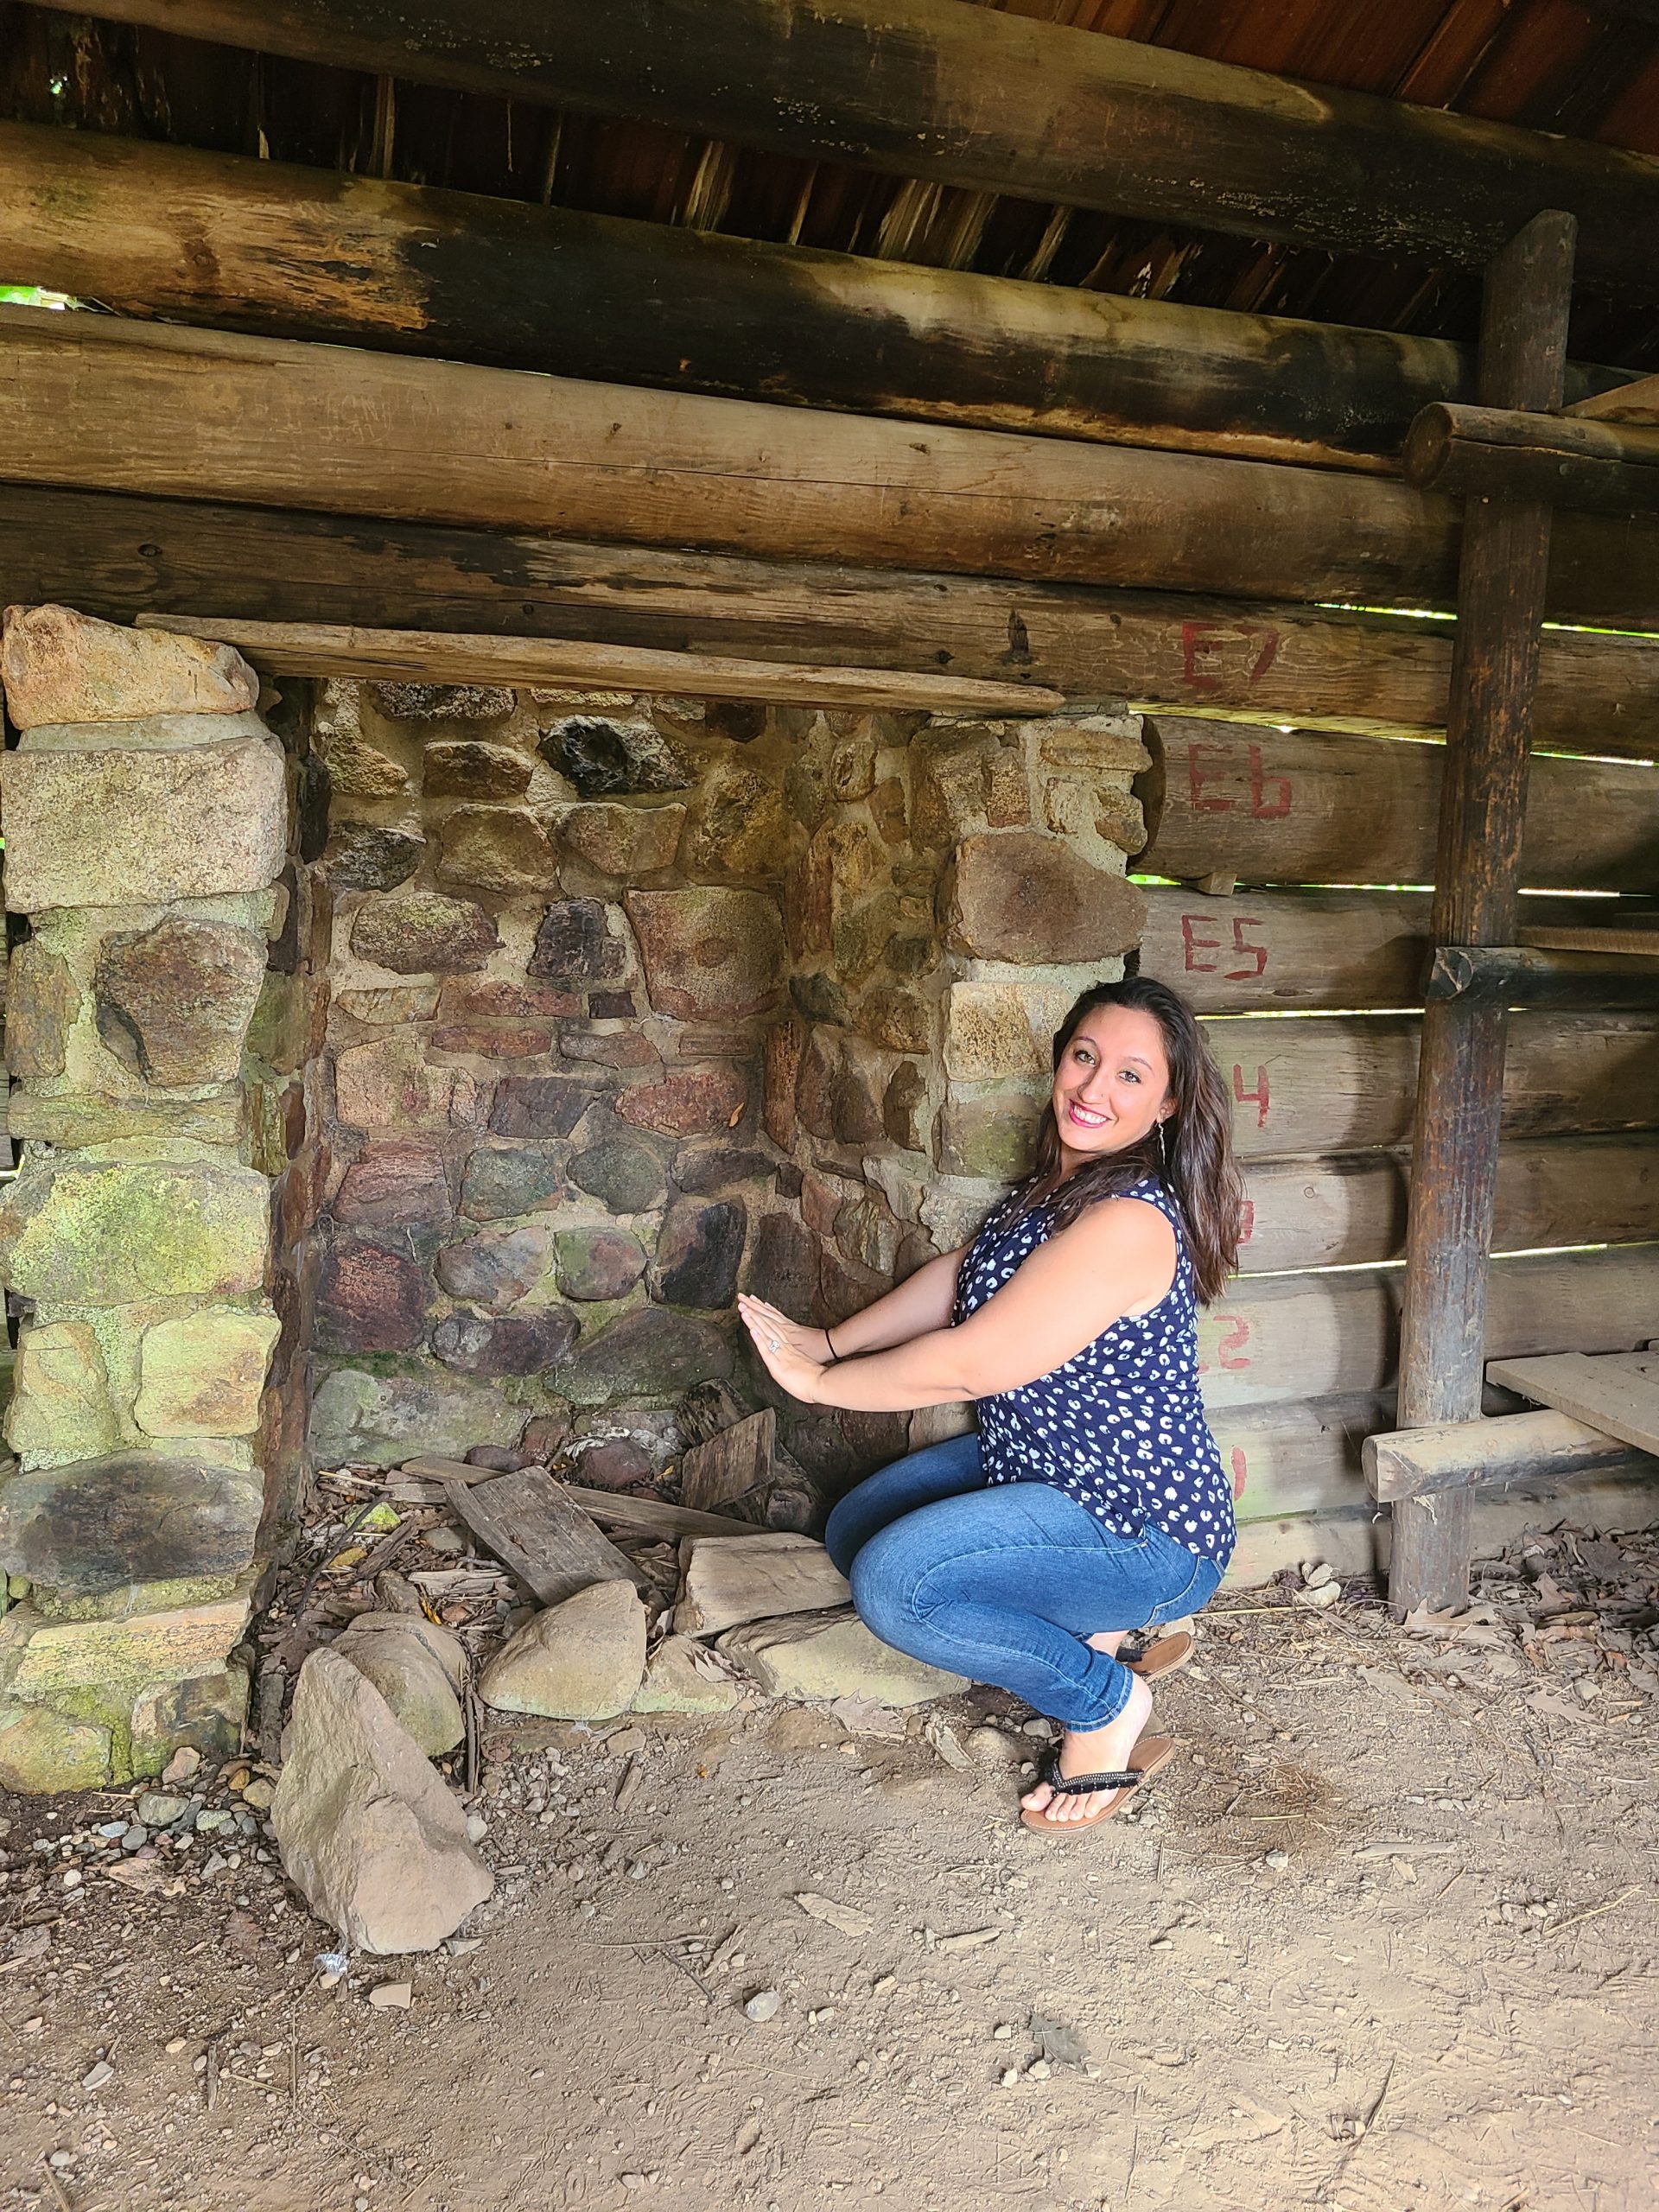 A woman sits near a hearth inside of a wooden cabin